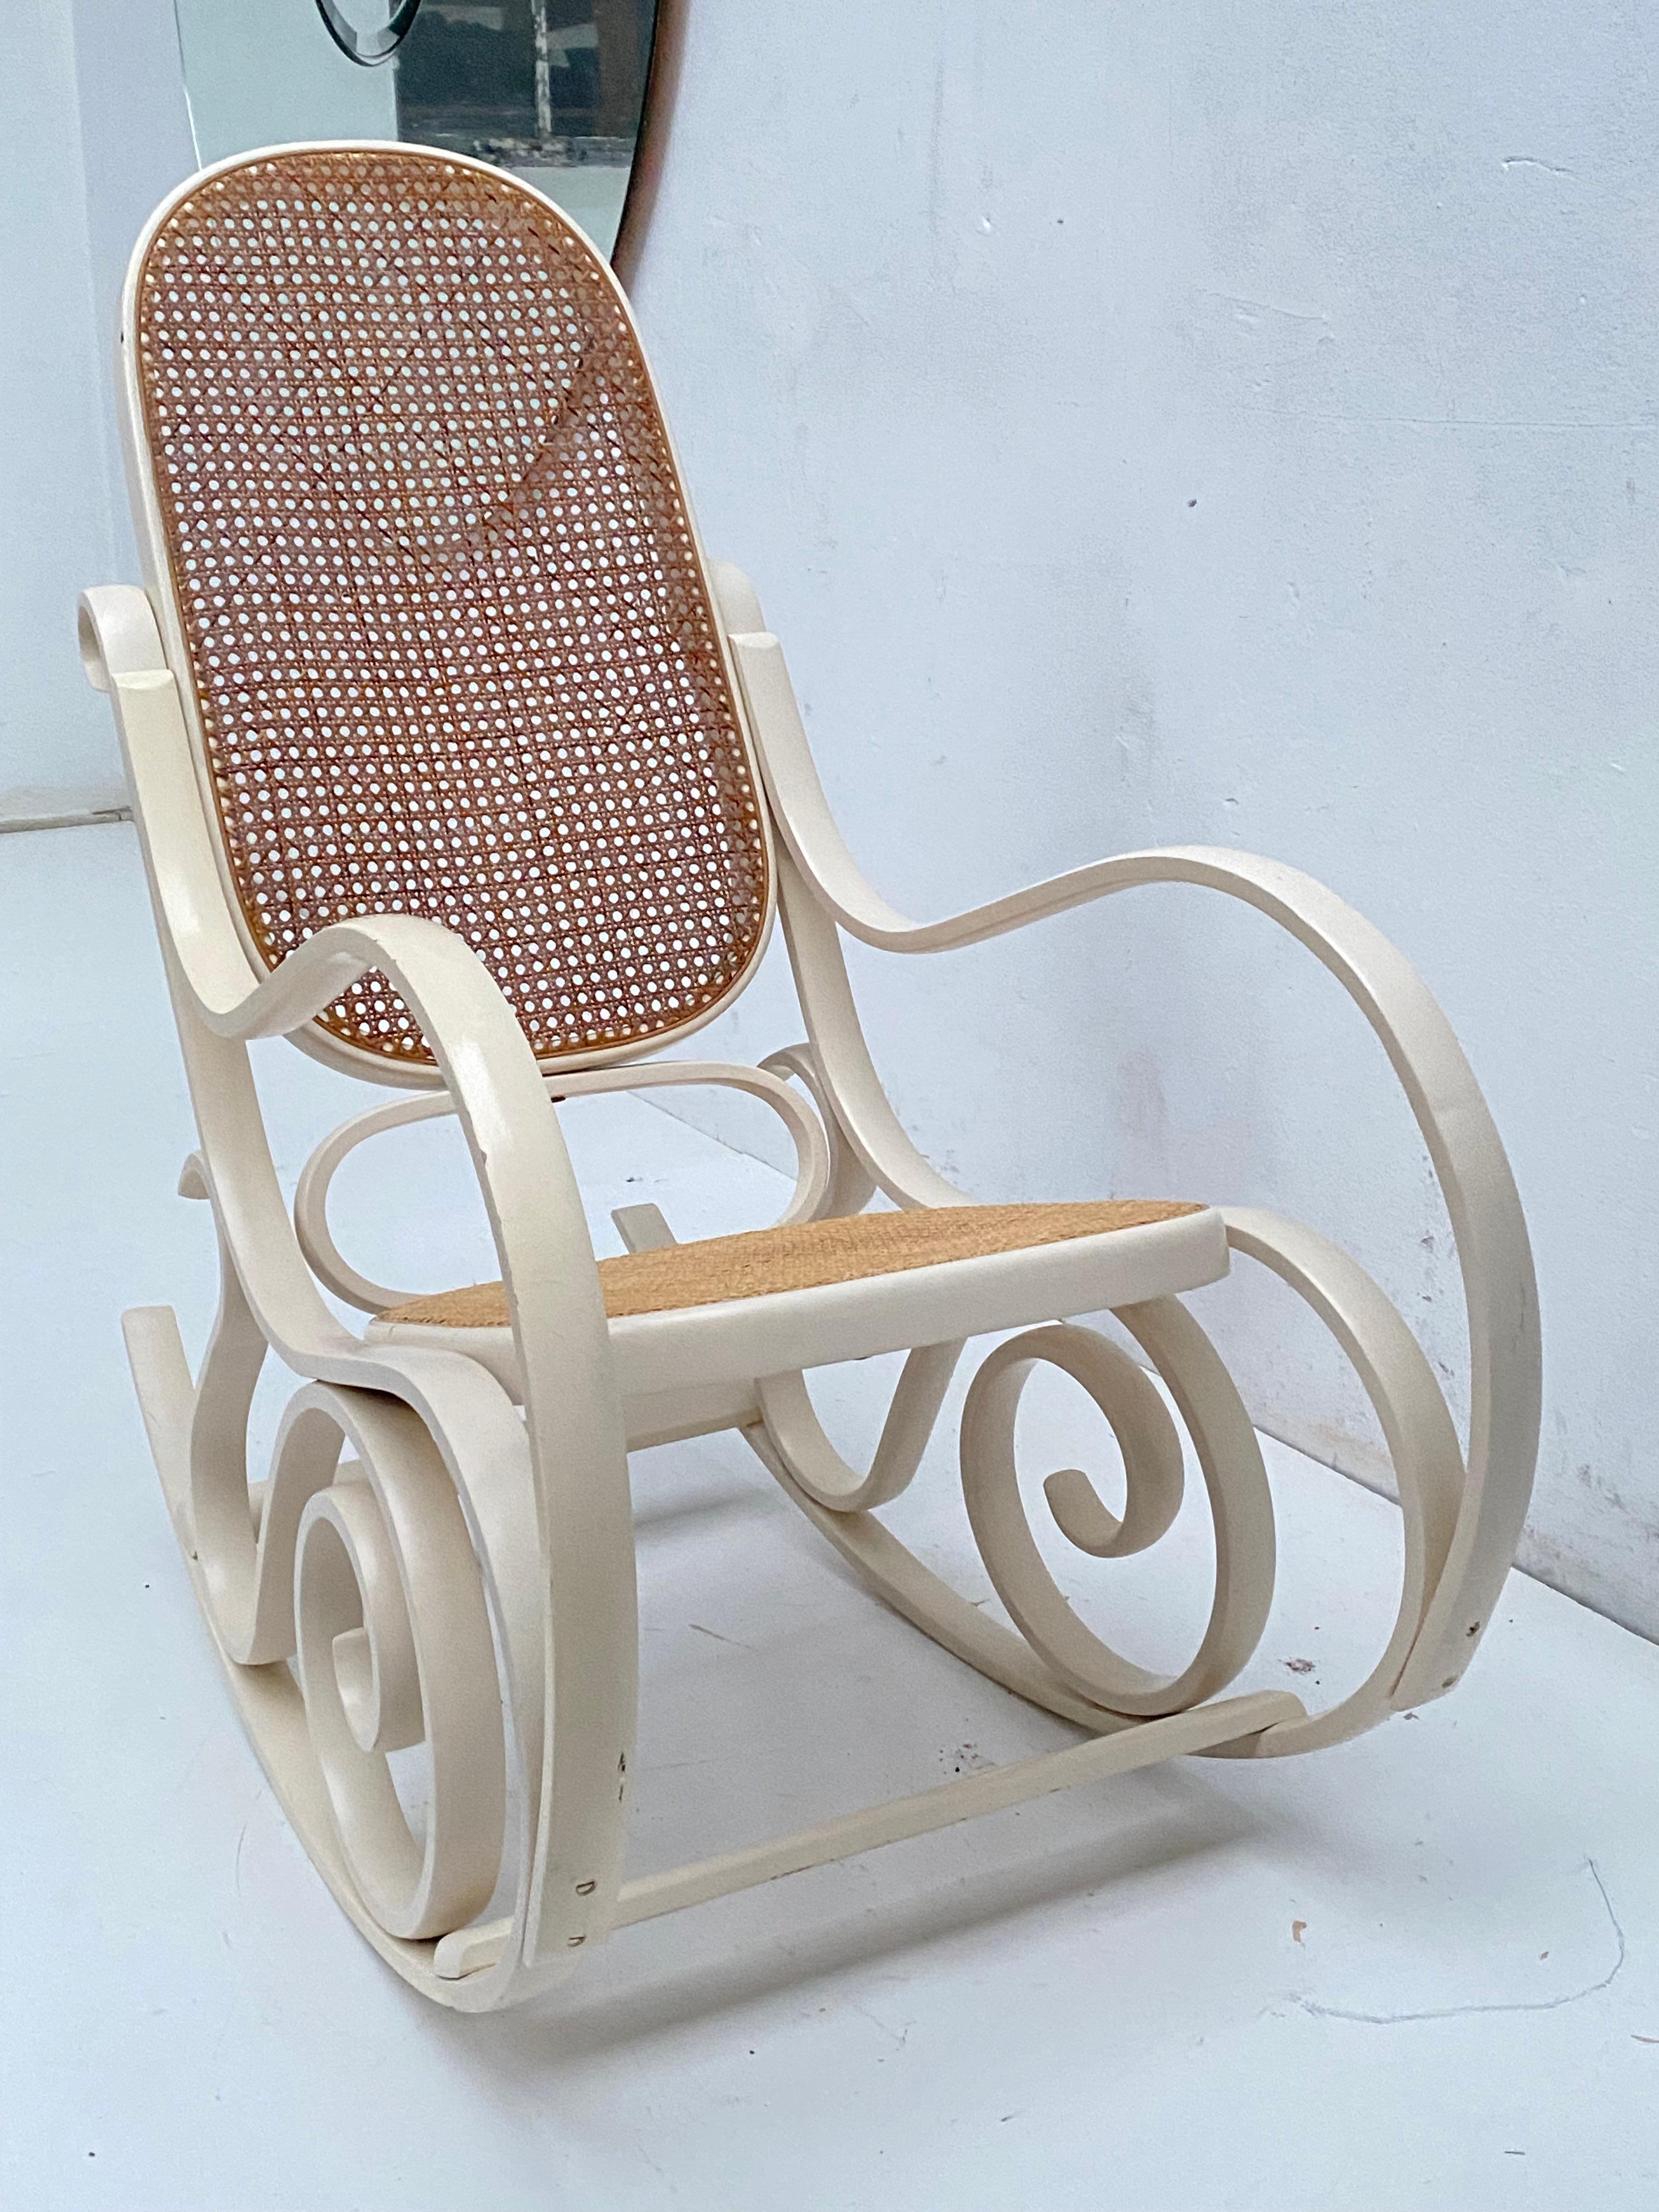 Beautiful 1970's Italian Rocking Chair by Luigi Crassevig for Crassevig

Bentwood Beech that has been white stained 

This chair has been made by steaming Beechwood in these curved shapes in the same manner as the classic Thonet chairs 

A classic